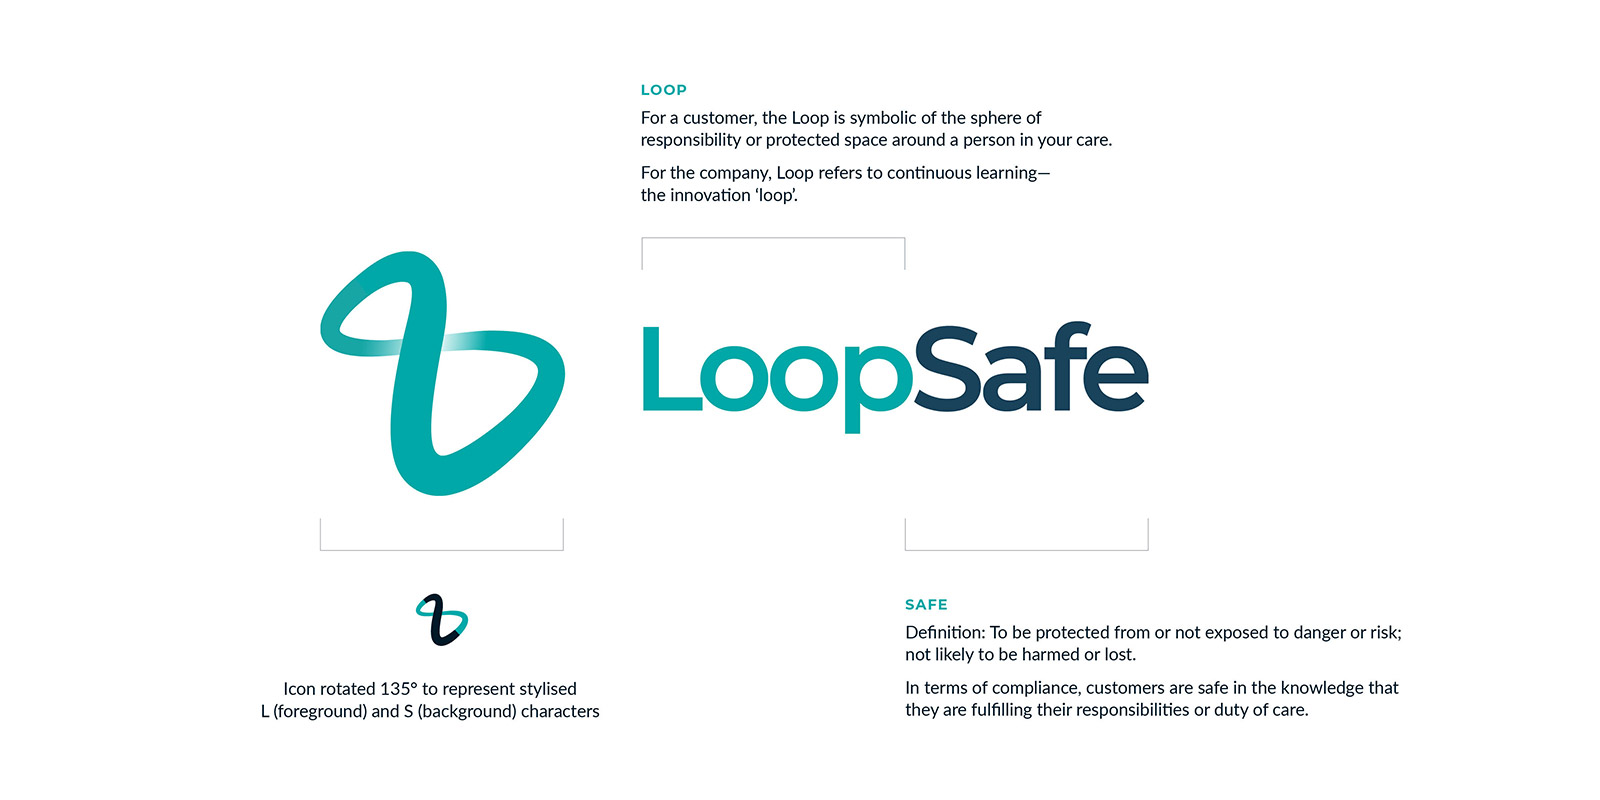 A graphic explaining the meaning of the LoopSafe logo